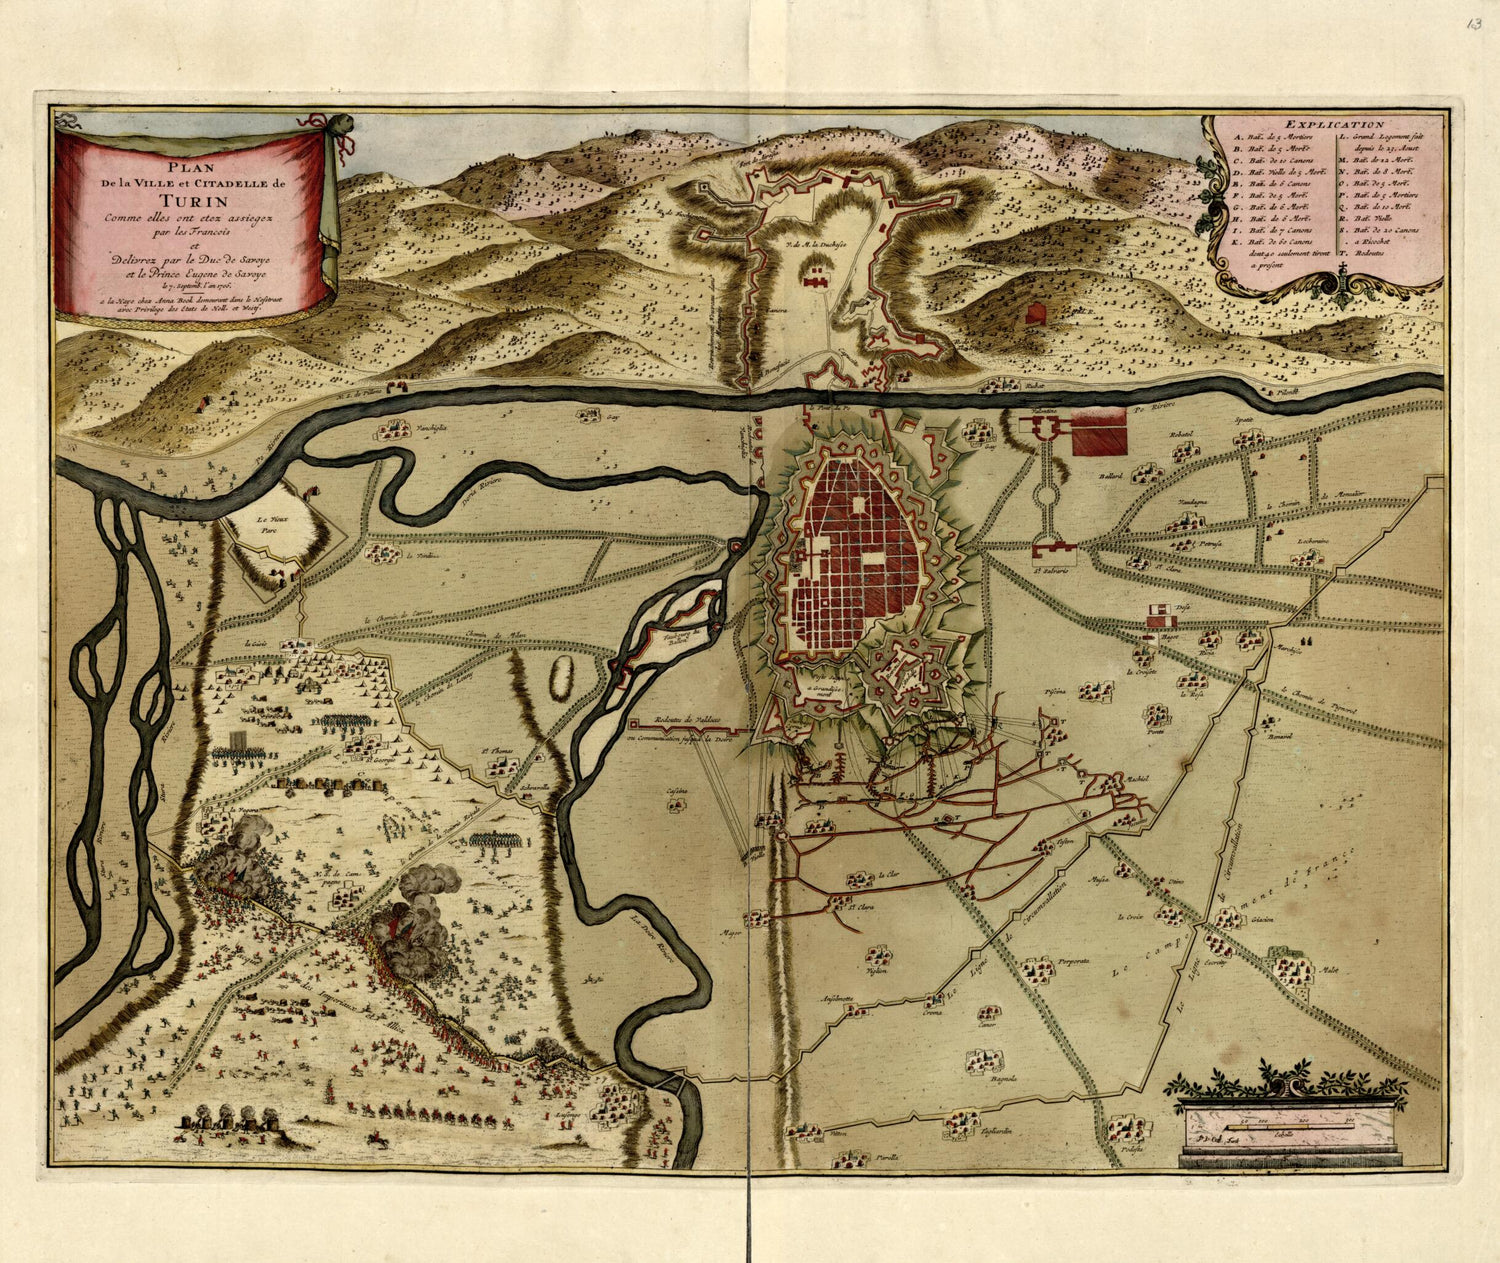 This old map of Plan De La Ville Et Citadelle De Turin from a Collection of Plans of Fortifications and Battles, 1684-from 1709 from 1709 was created by Anna Beeck in 1709